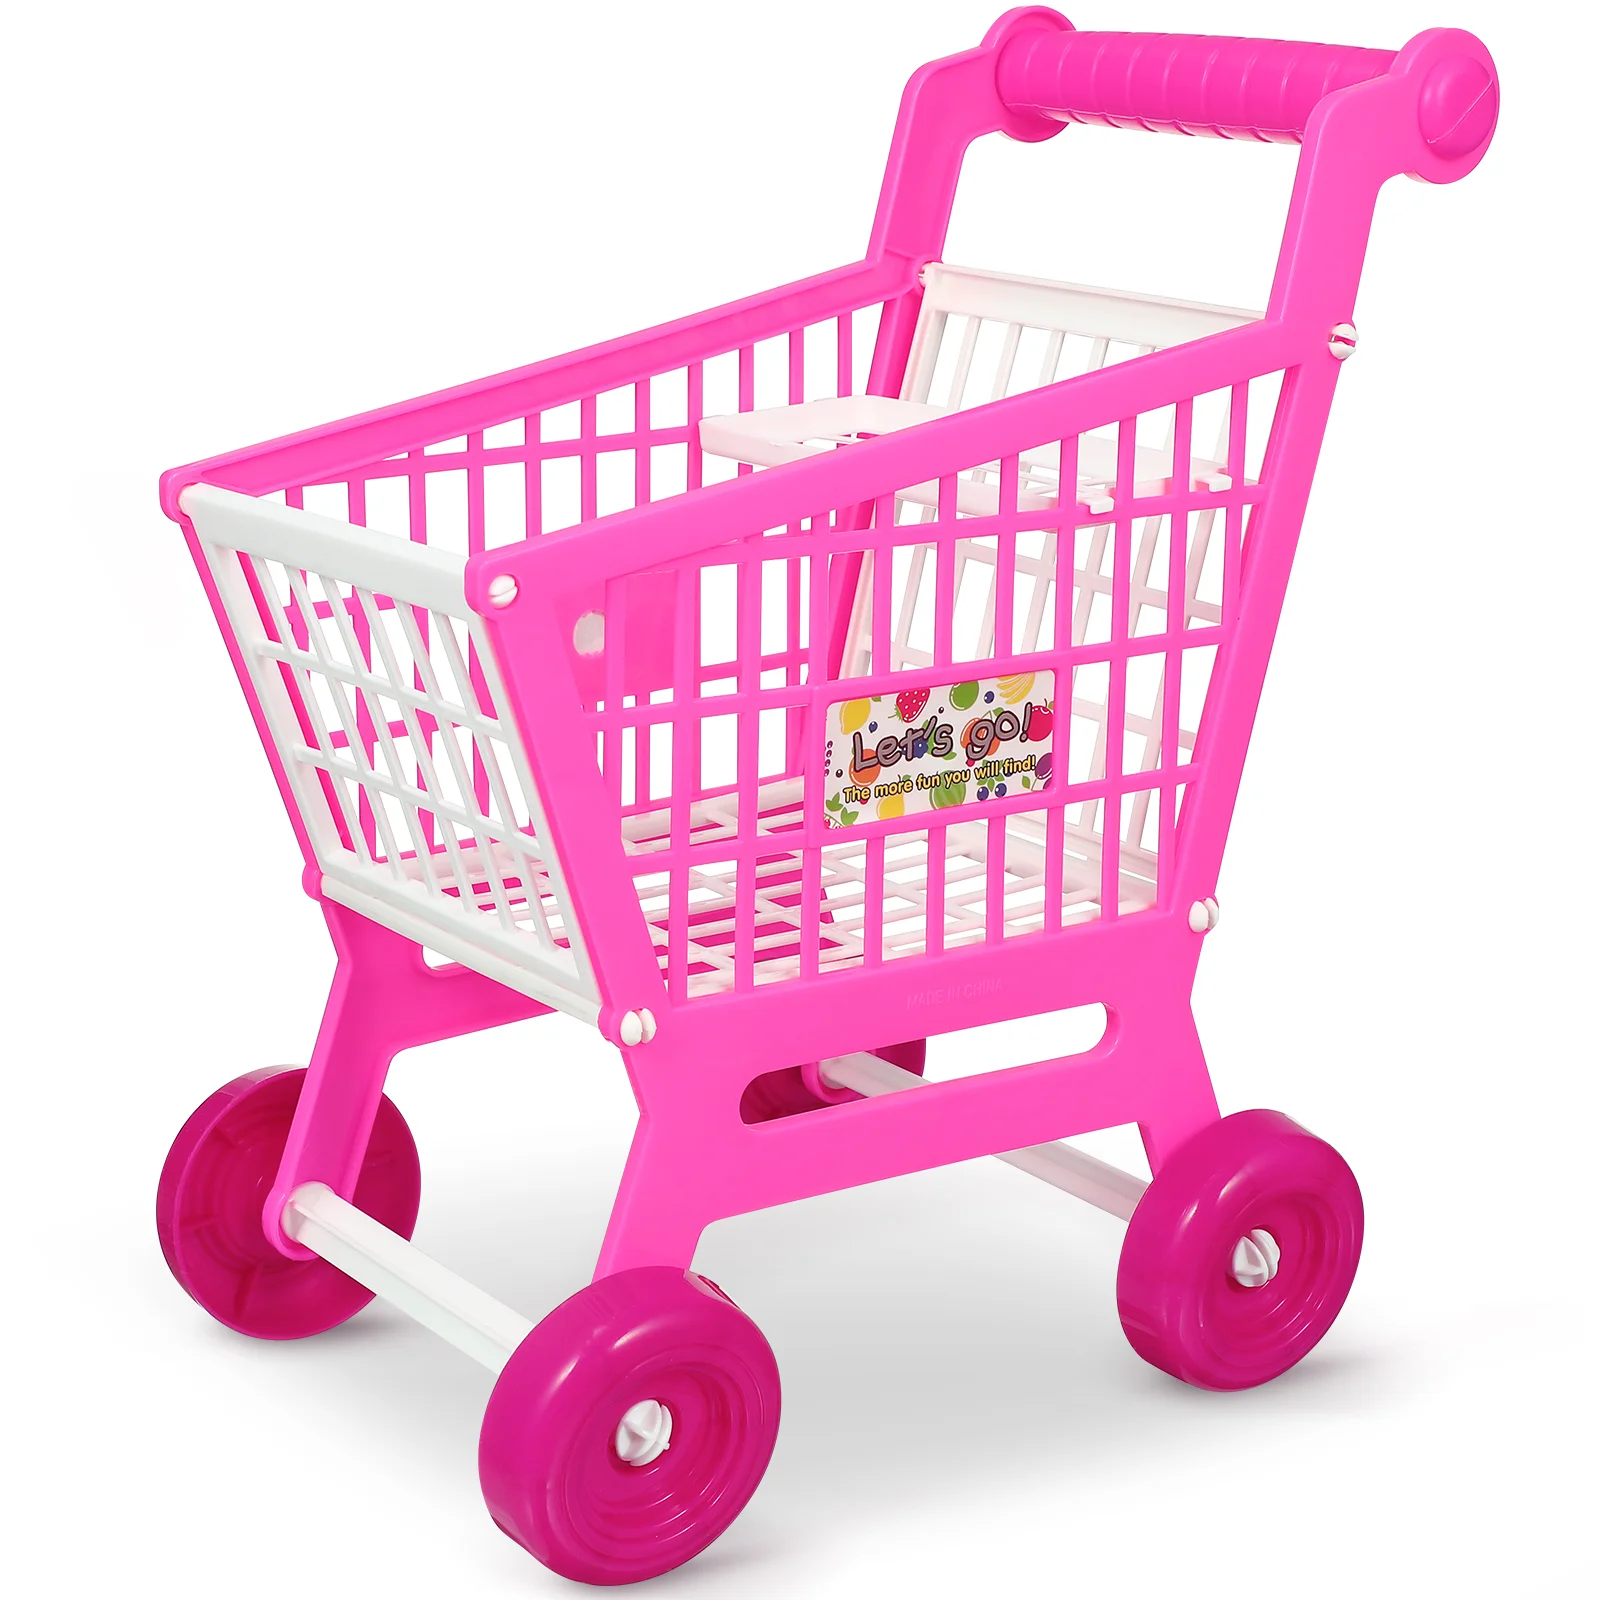 

Pretend Toy Grocery Cart Toddler Kids Shopping Carts Plastic Mini Toys Toddlers Infans Stroller Vans